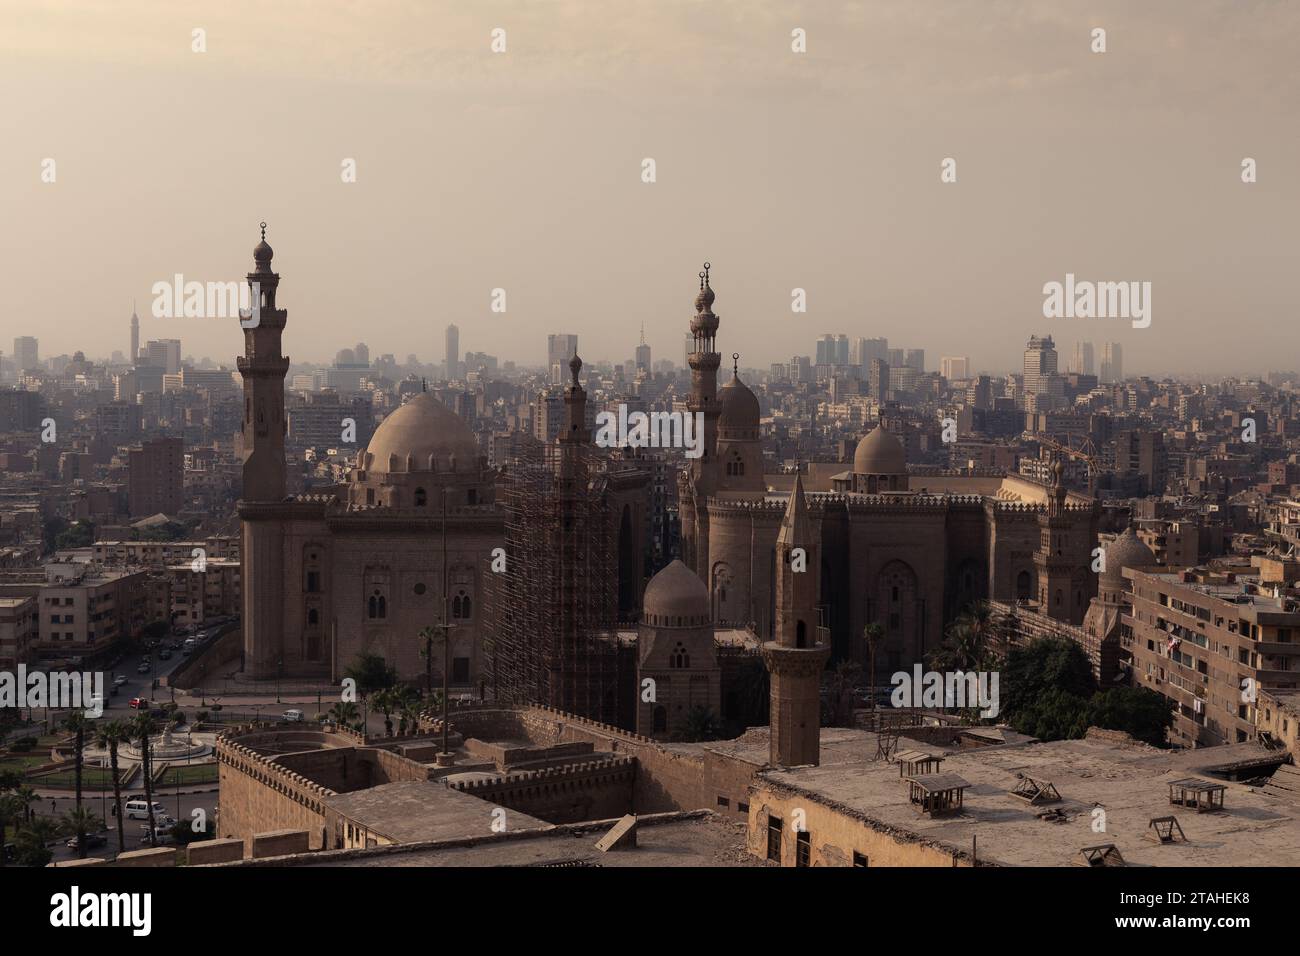 Mosque Madrasa of Sultan Hassan in Old Cairo, Egyp Stock Photo